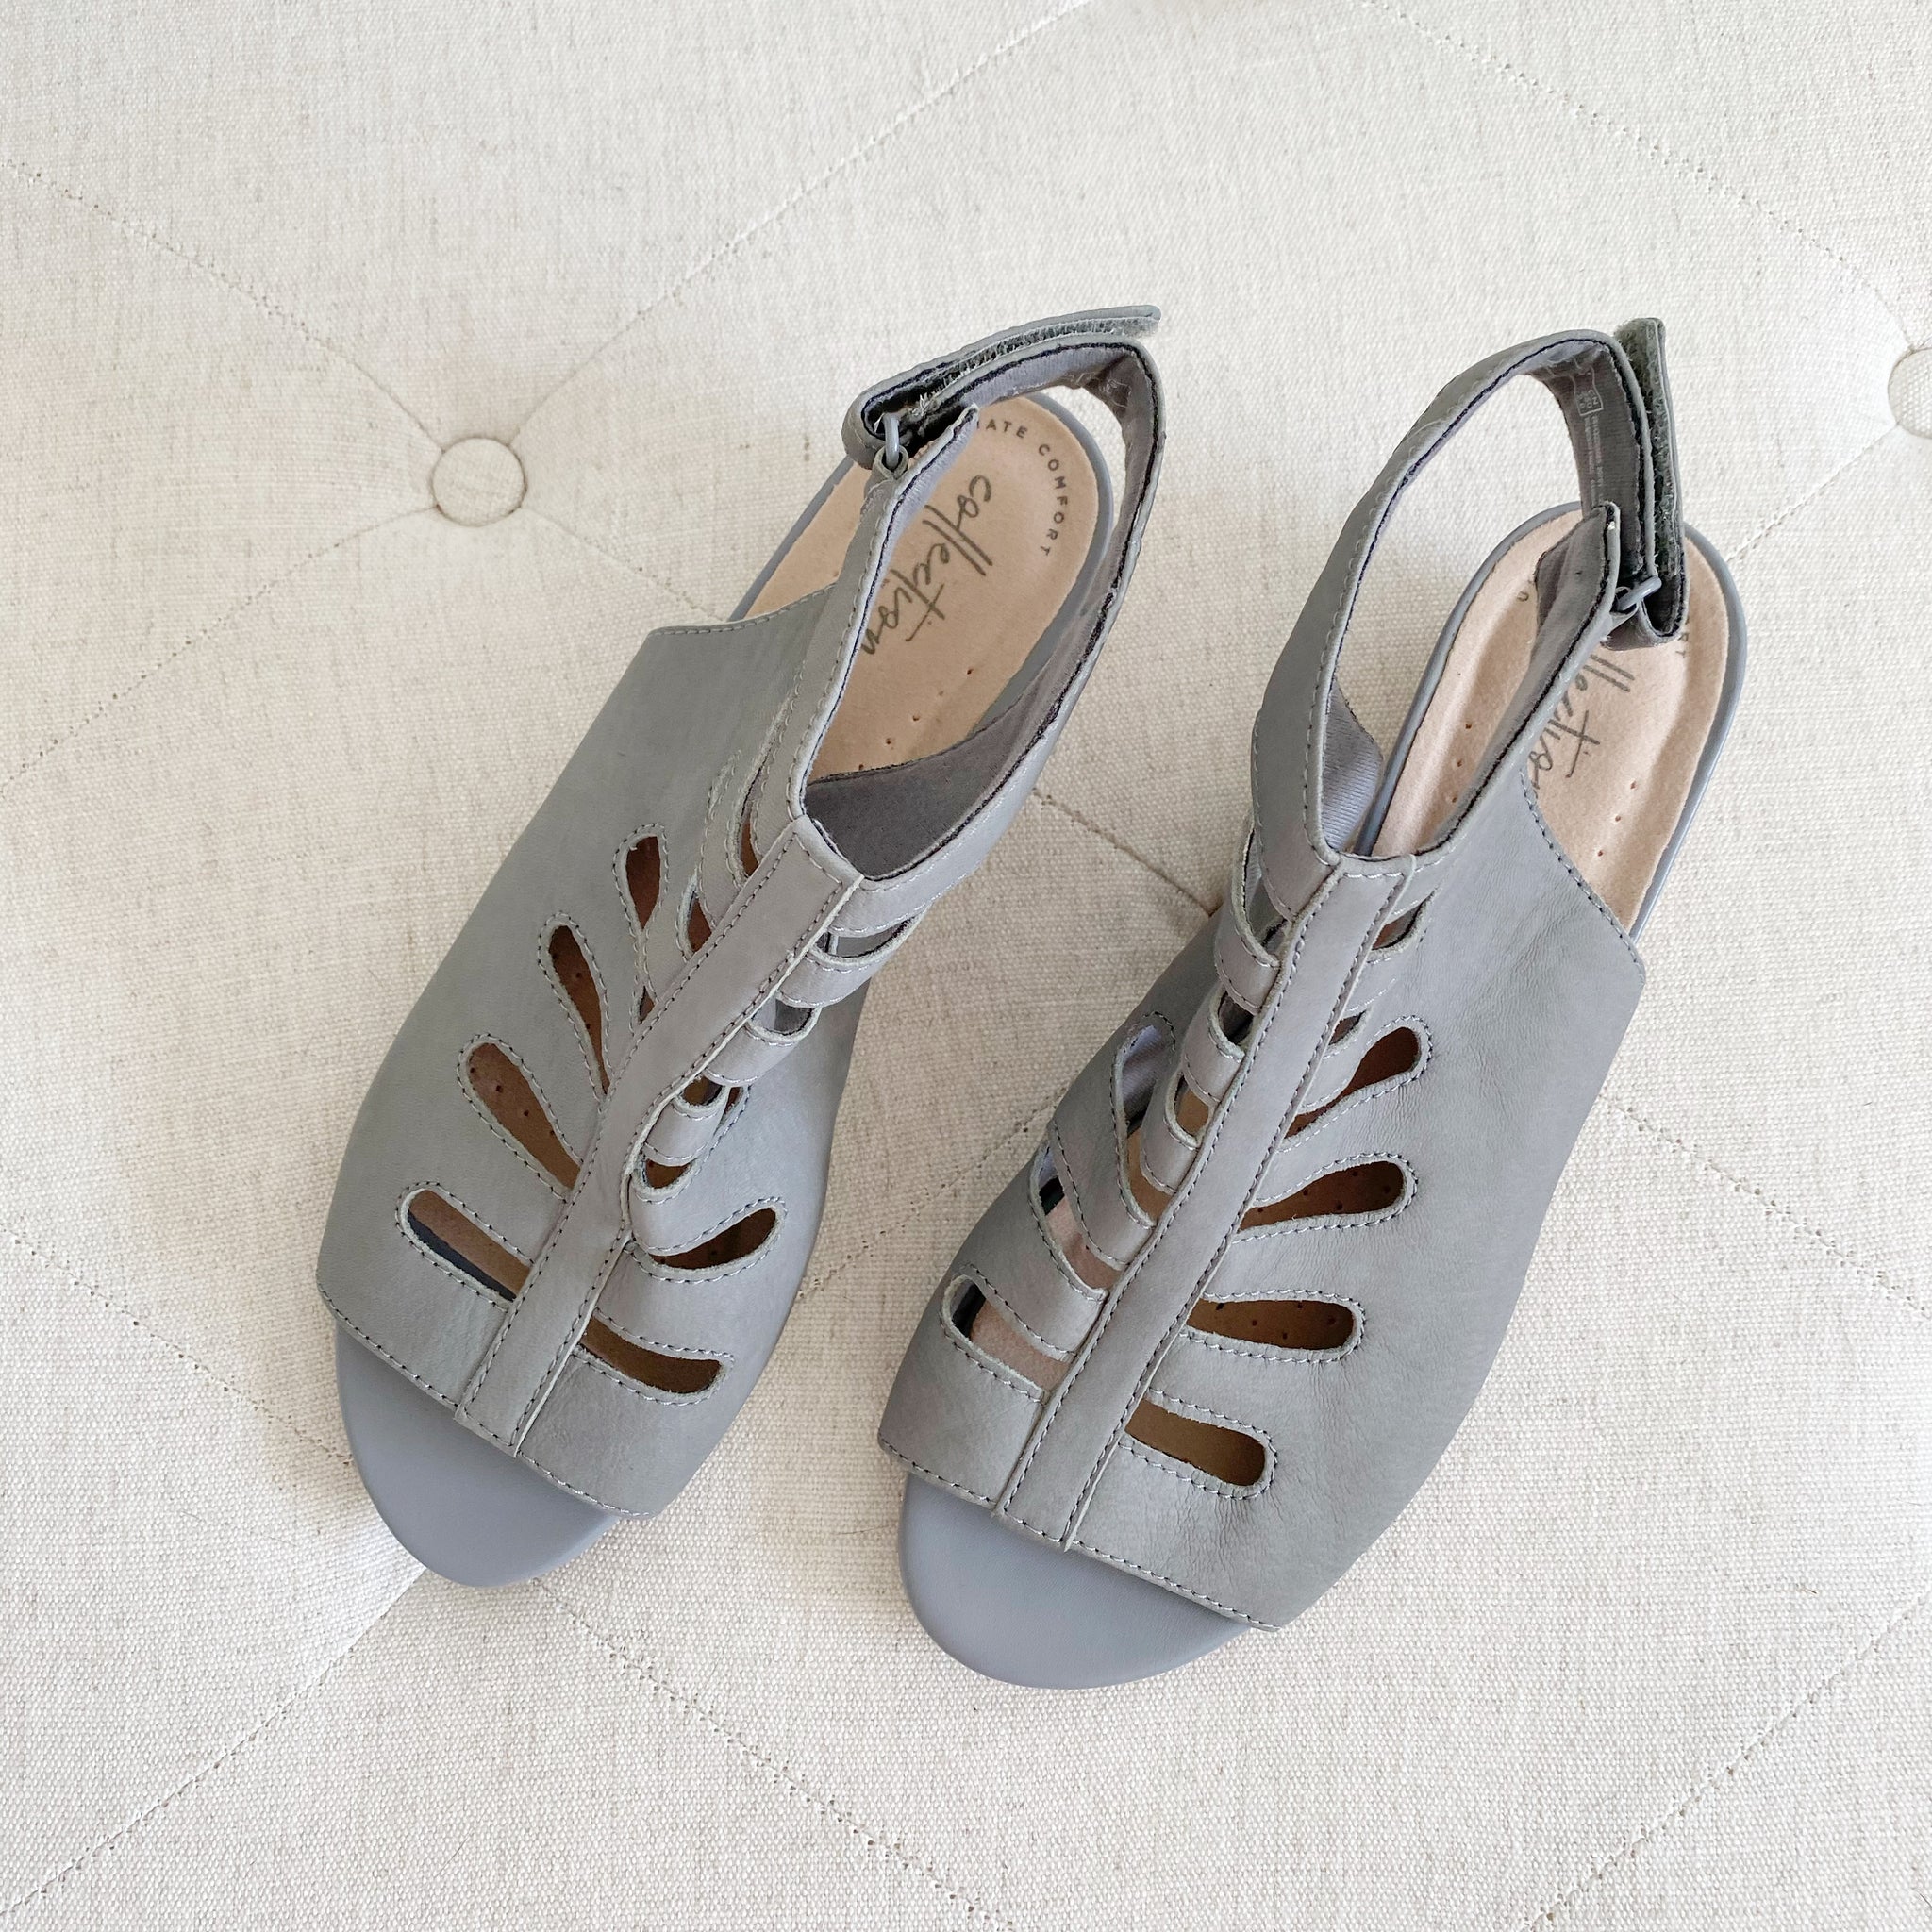 clarks ultimate comfort collection sandals